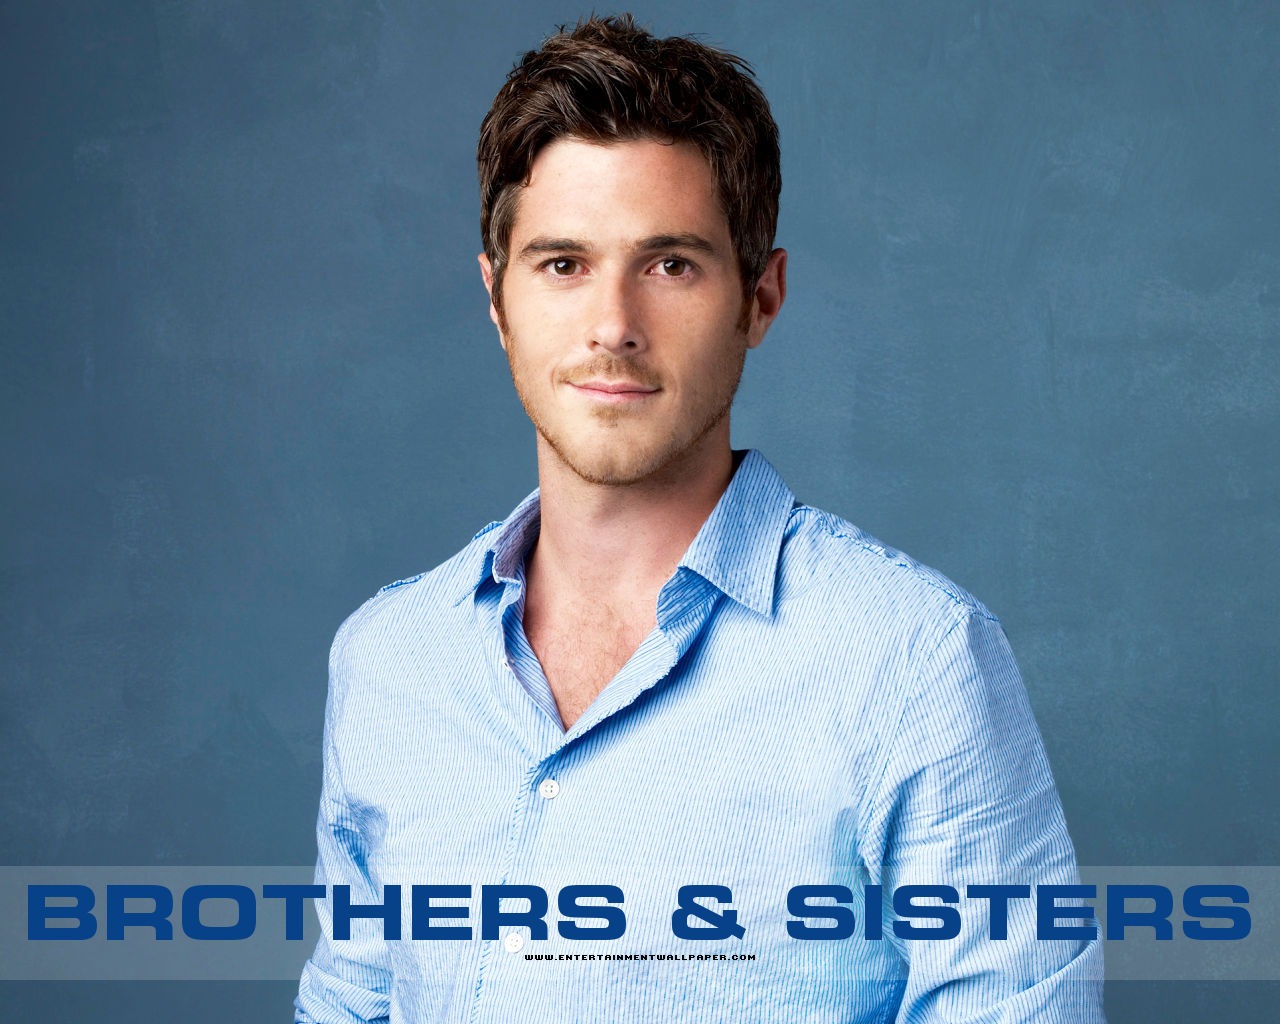 Brothers & Sisters 兄弟姐妹 #16 - 1280x1024